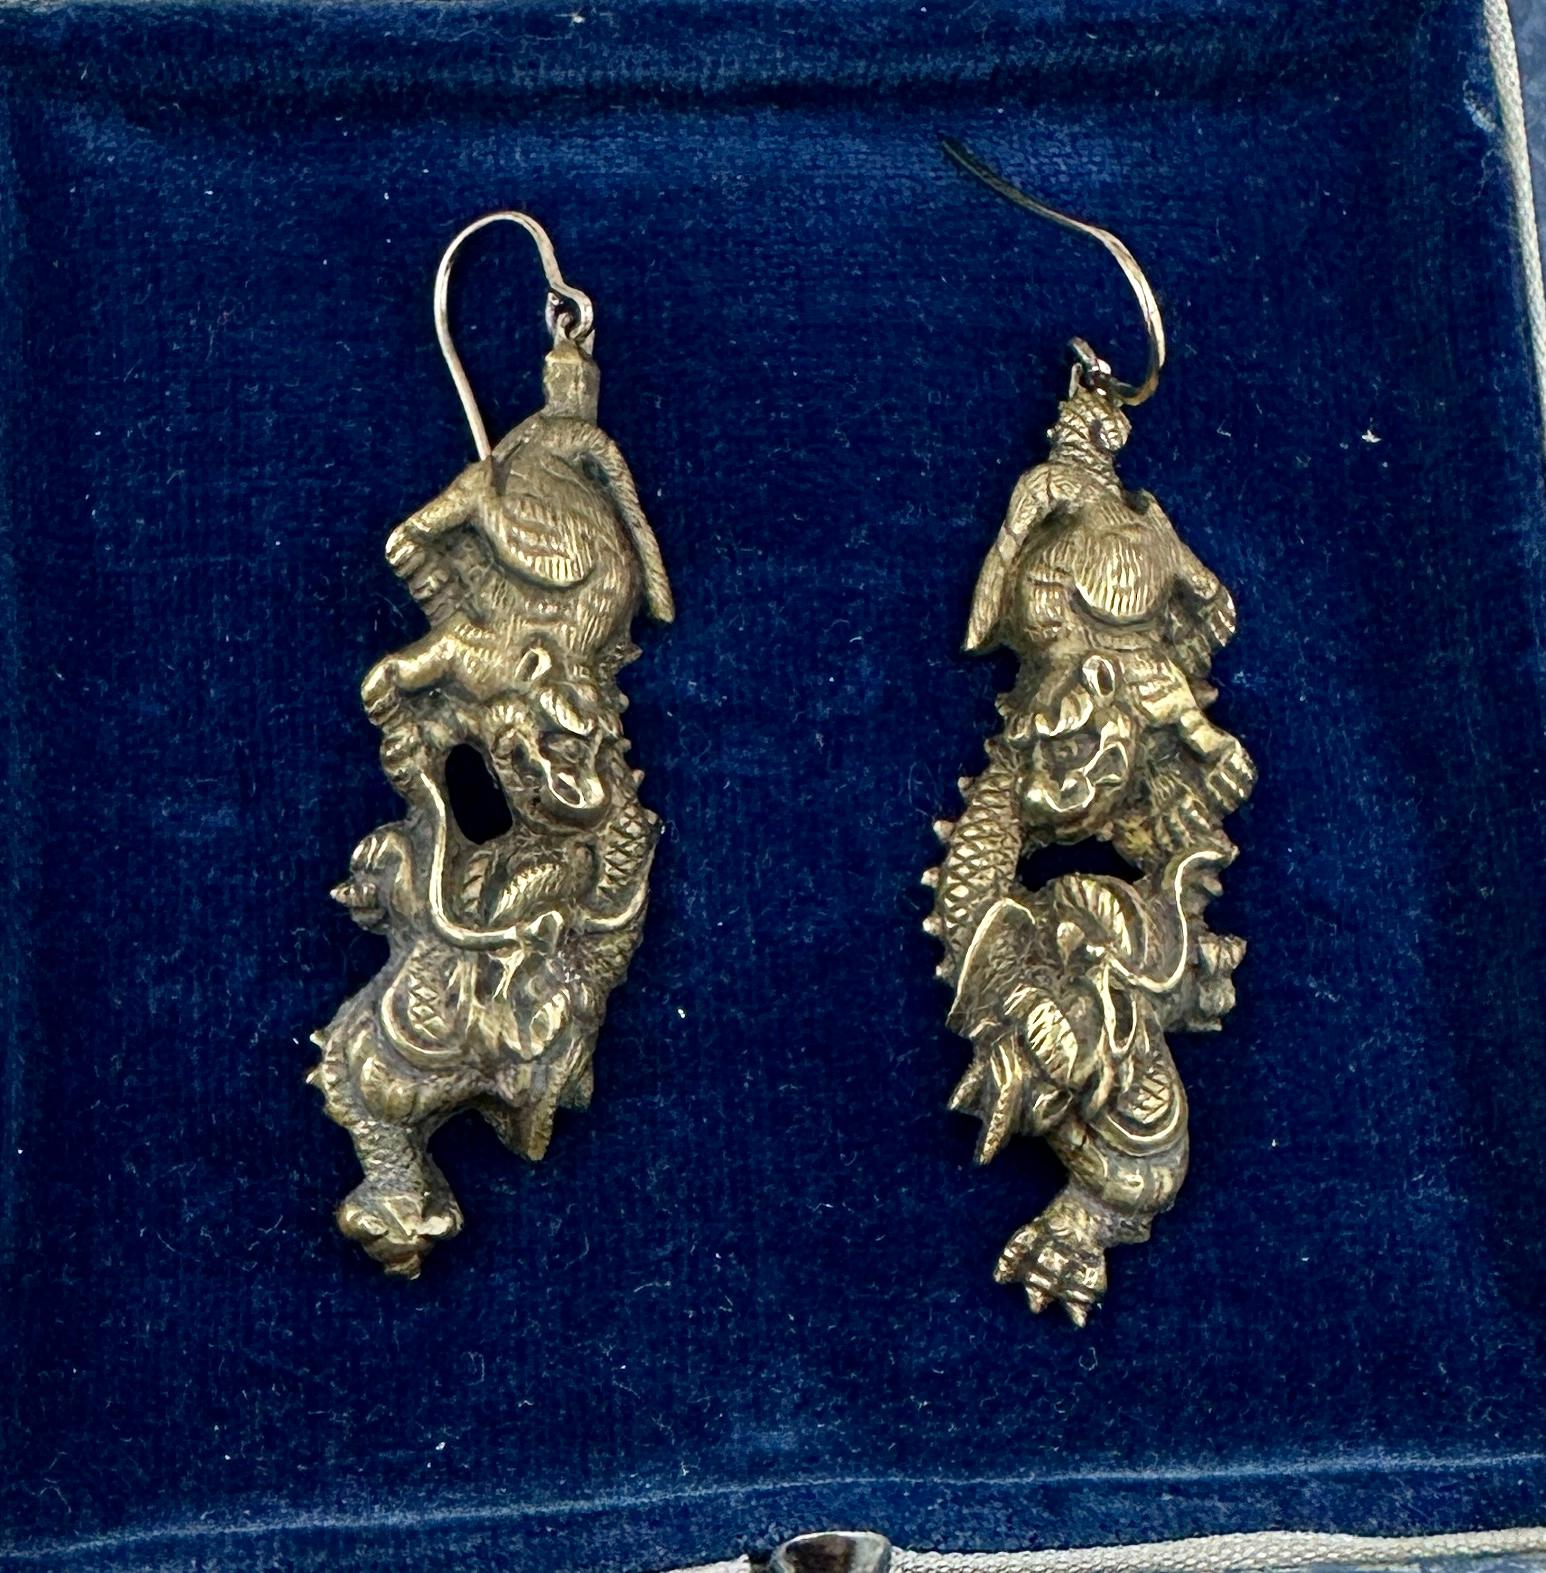 This is a very rare pair of Antique Shakudo Earrings from Japan depicting a Foo Dog or Dragon battling a Dragon.  The extraordinary imagery is full of history, drama and mystique.  The Dragons and Foo Dogs are absolutely wonderful with superb